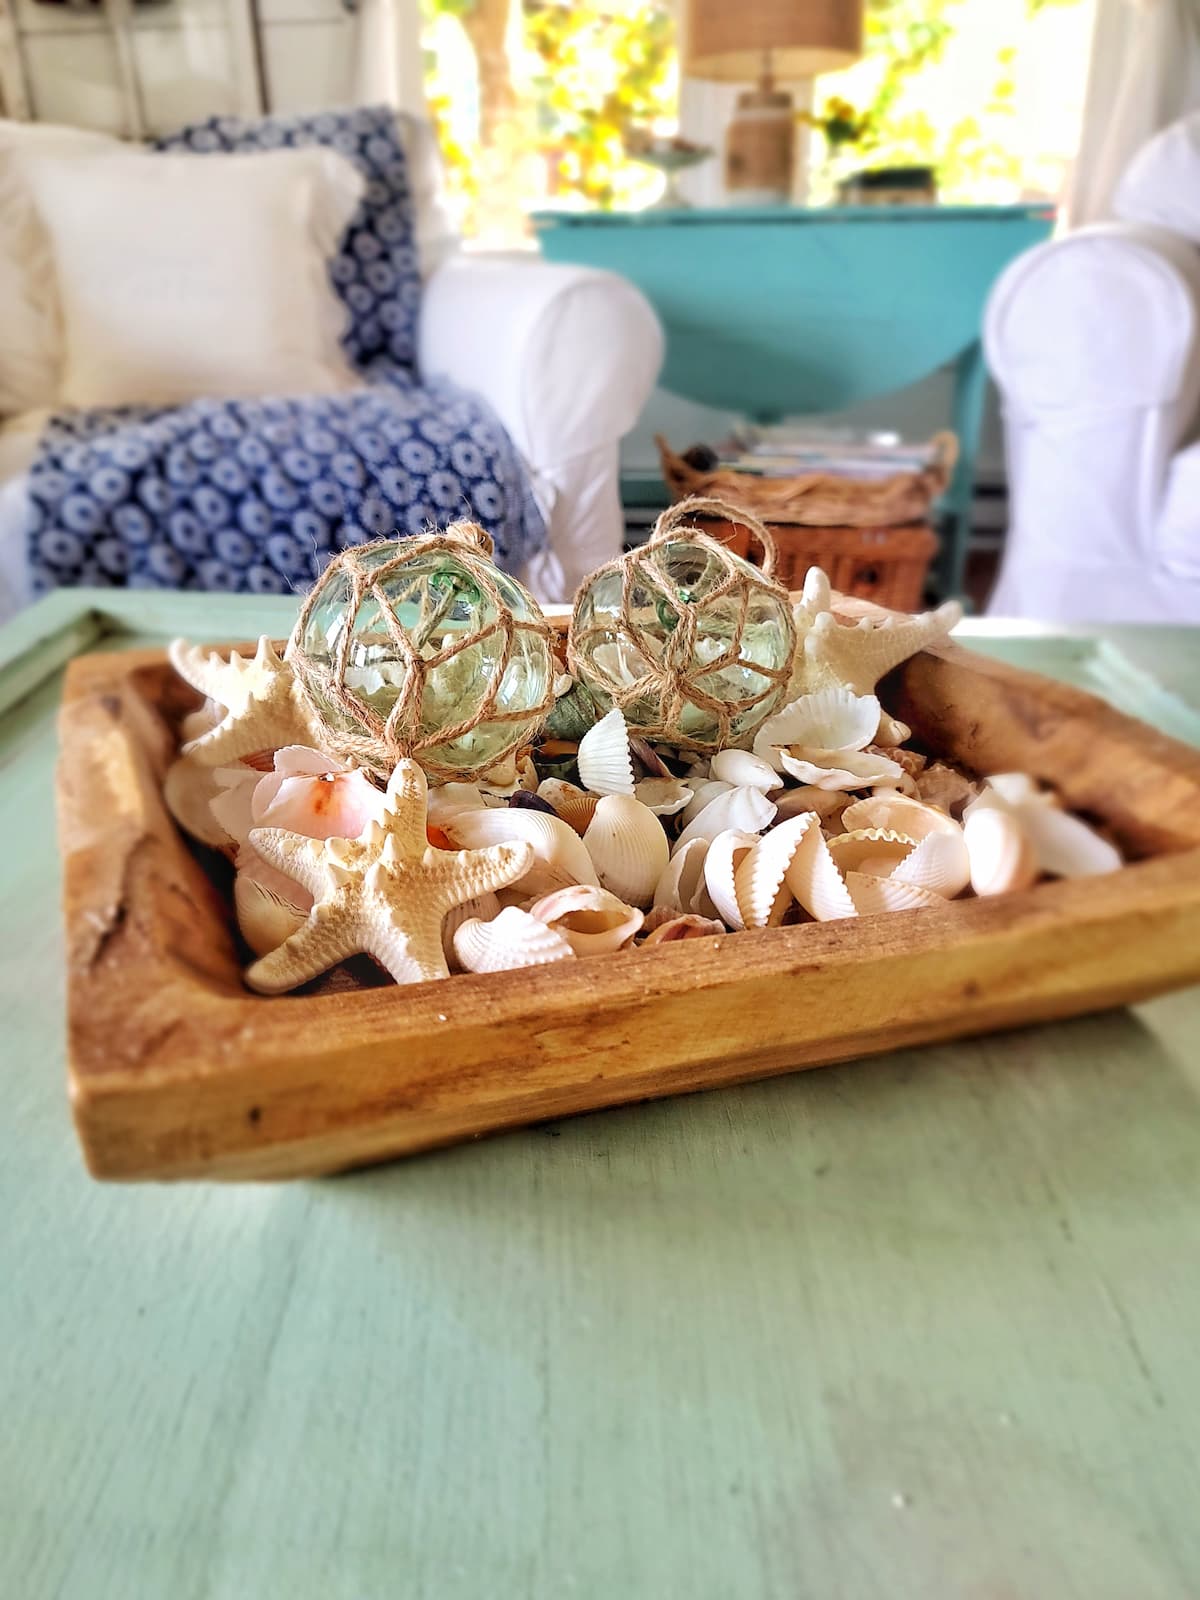 Coastal Cottage Décor Ideas for Your Home - Shiplap and Shells